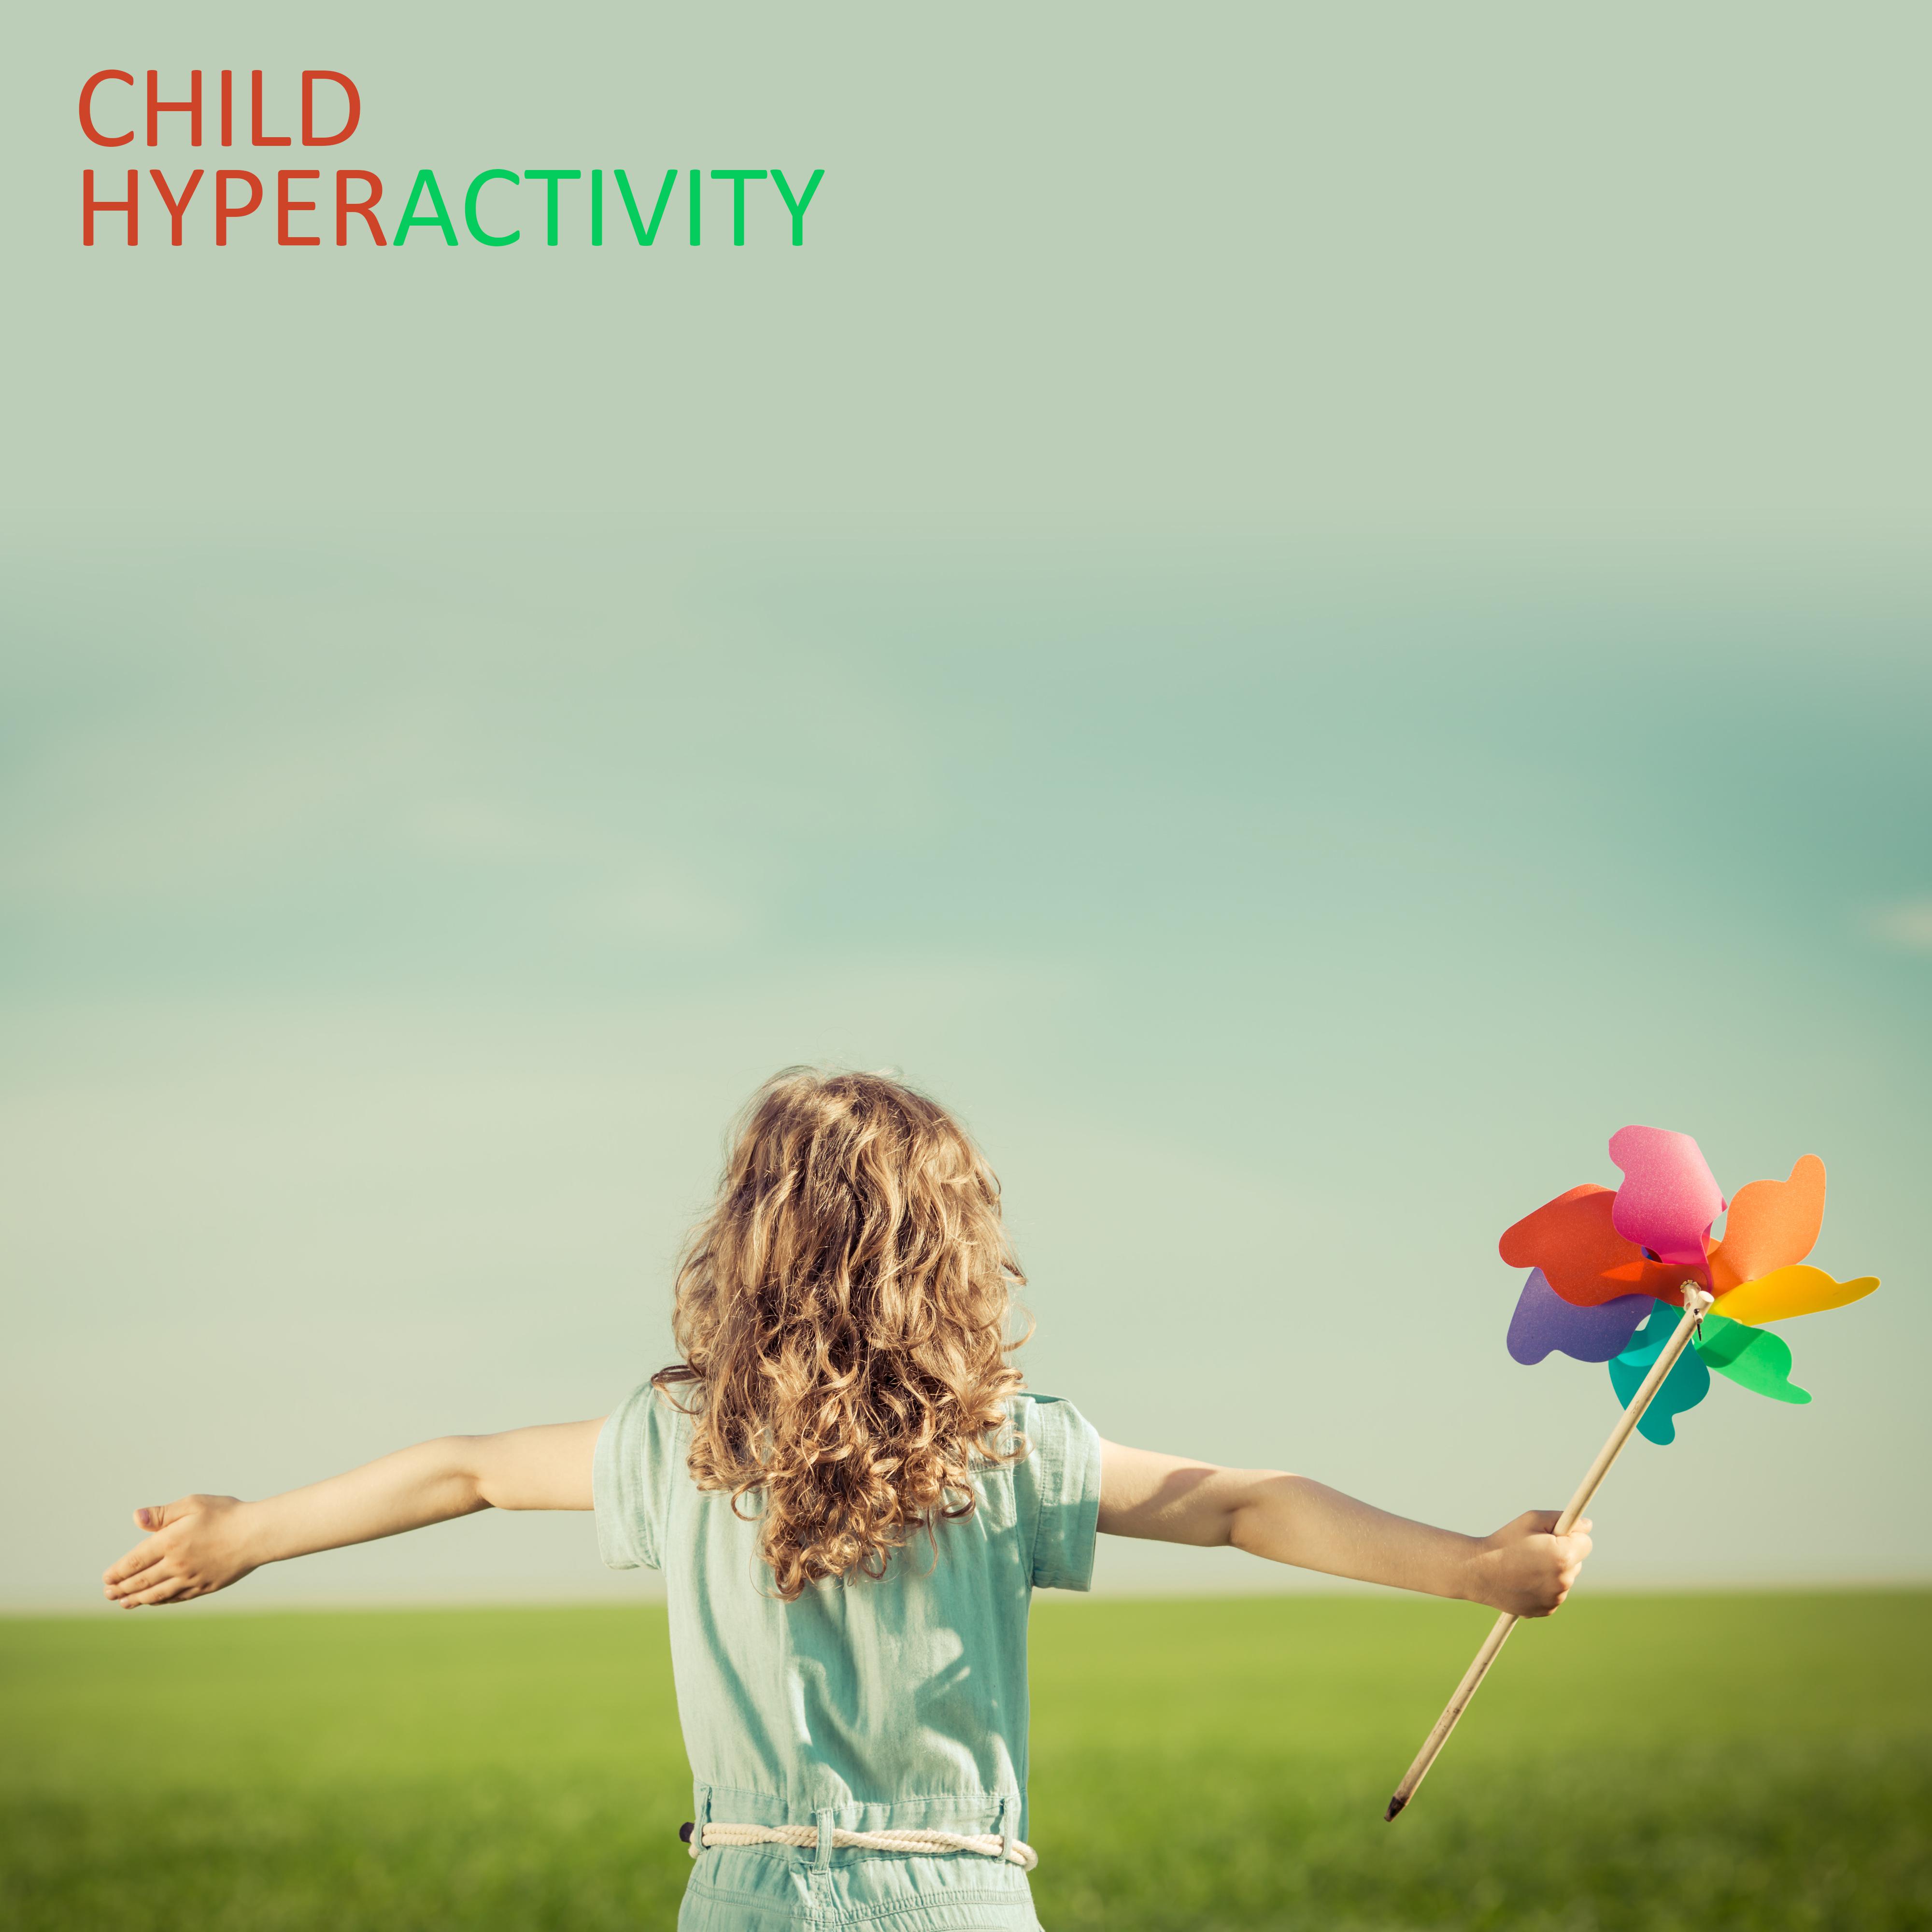 Child Hyperactivity: Therapeutic New Age Music Calming and Soothing Effect on Children, Helping Them to Calm Down or Fall Asleep Peacefully